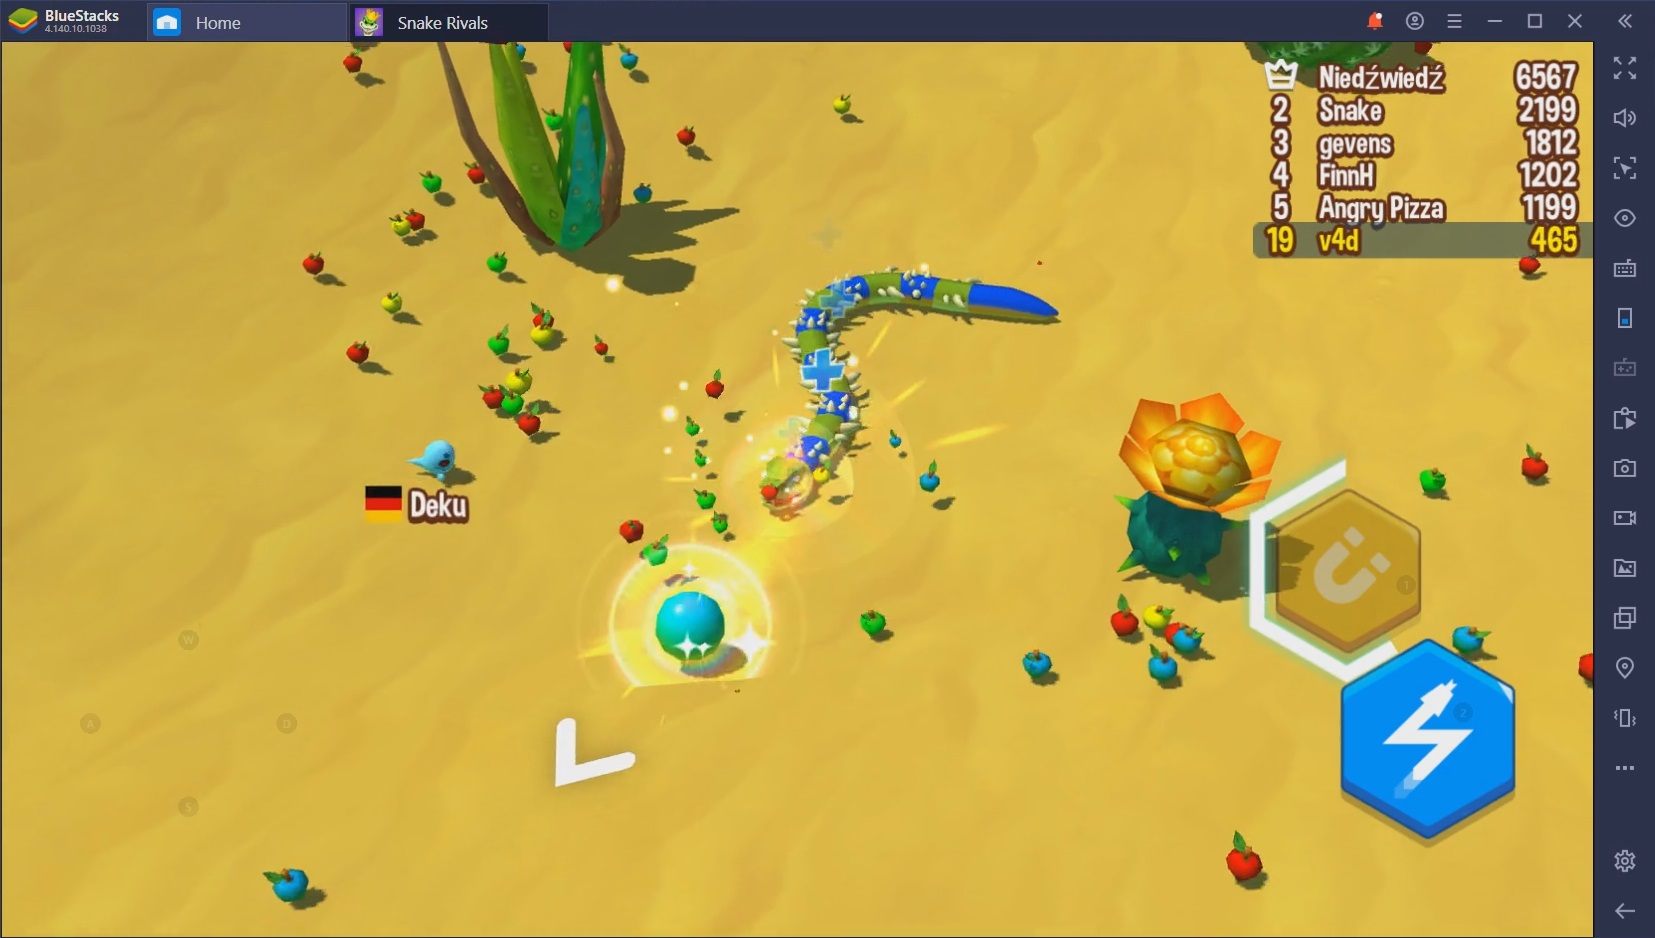 Play Snake Rivals on PC with BlueStacks